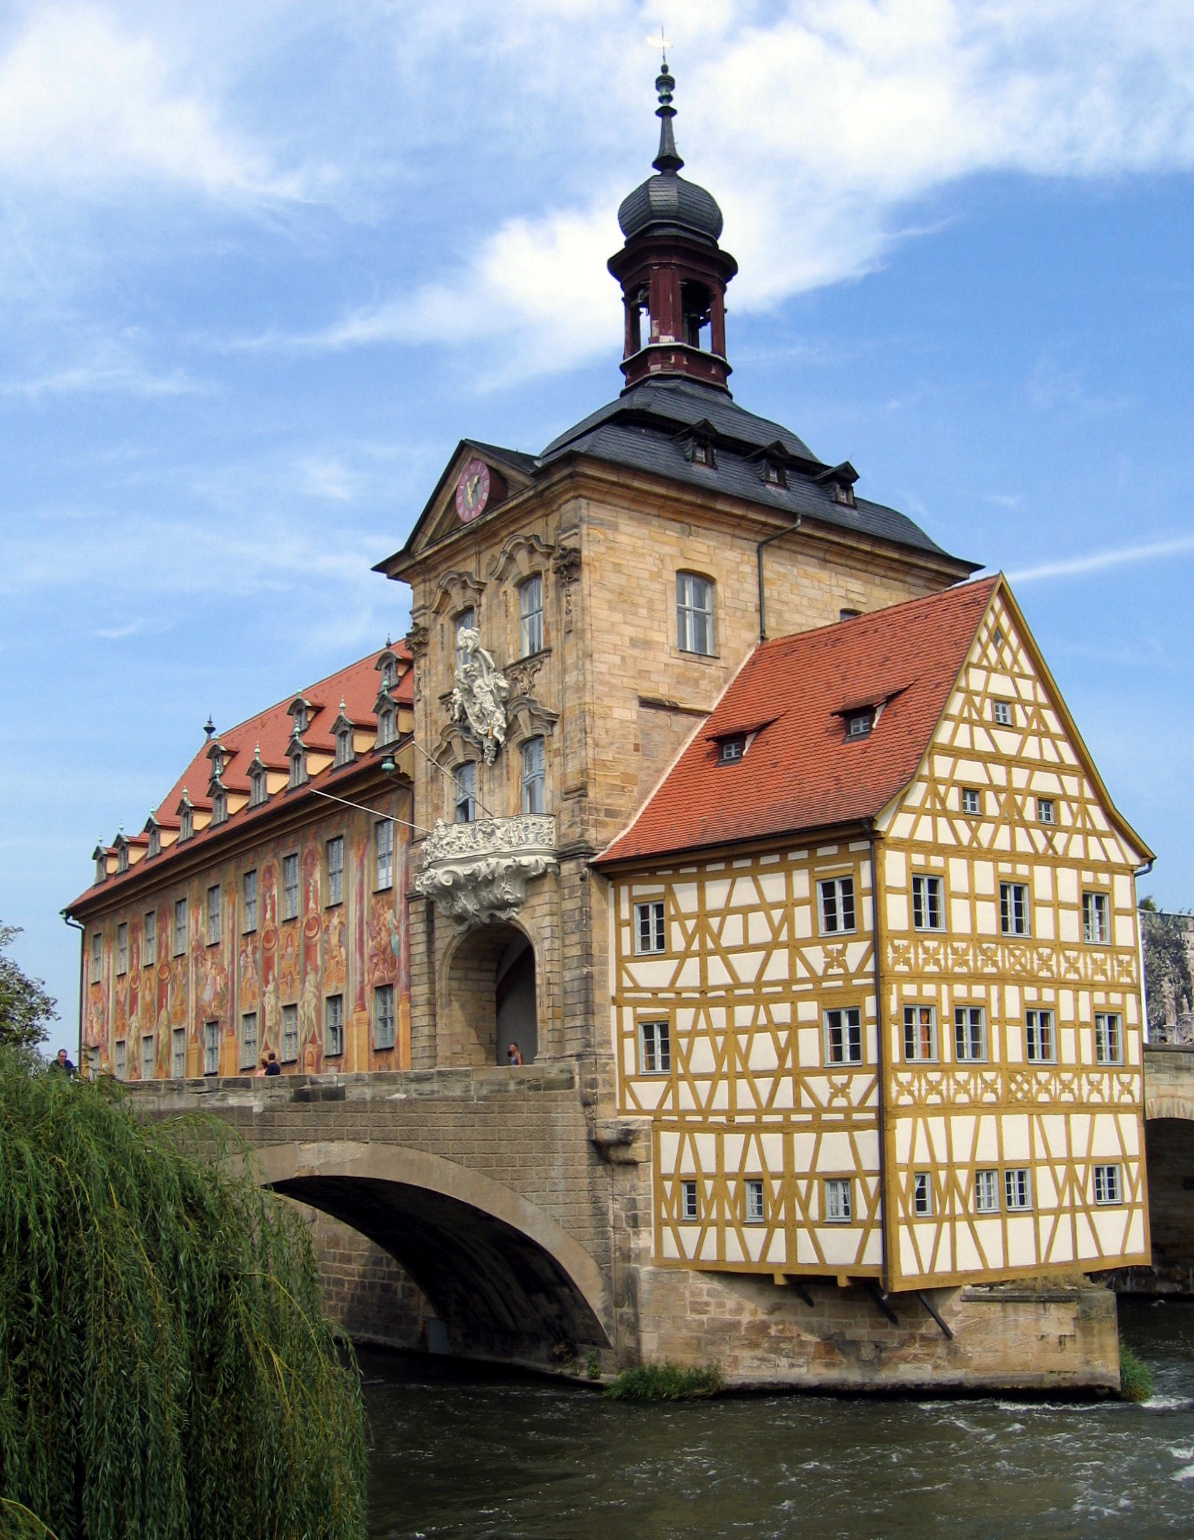 "Bamberg-Rathaus1-Asio" by Asio otus - Own work. Licensed under CC BY-SA 3.0 via Wikimedia Commons - https://commons.wikimedia.org/wiki/File:Bamberg-Rathaus1-Asio.JPG#/media/File:Bamberg-Rathaus1-Asio.JPG